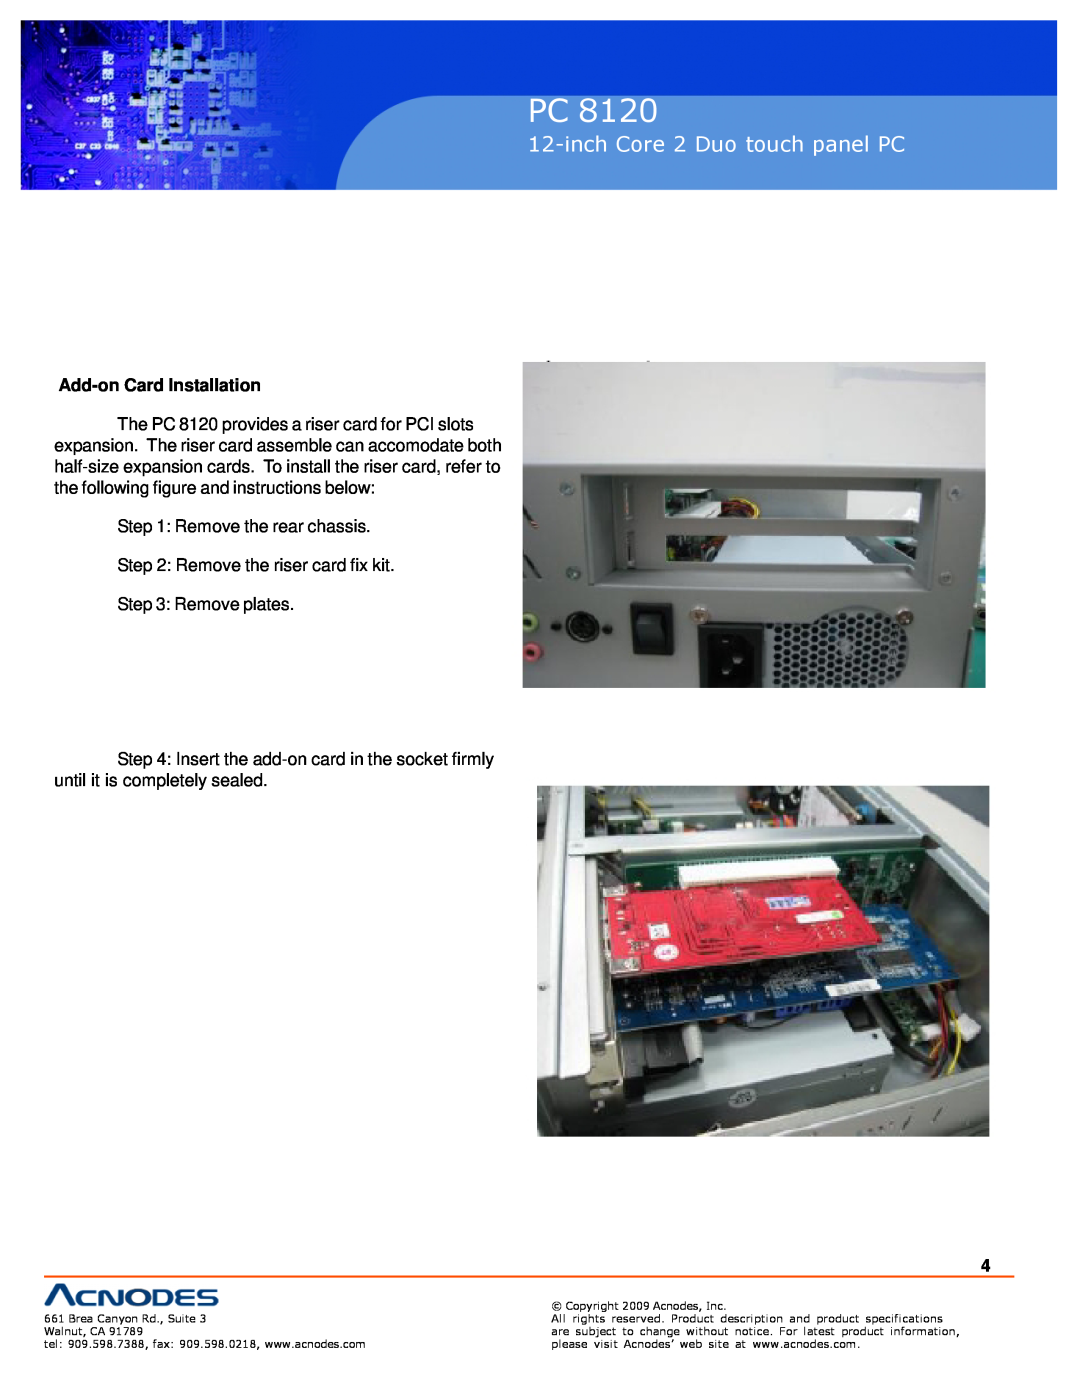 Acnodes PC 8120 specifications Add-on Card Installation, inch Core 2 Duo touch panel PC, inch touch panel PC 